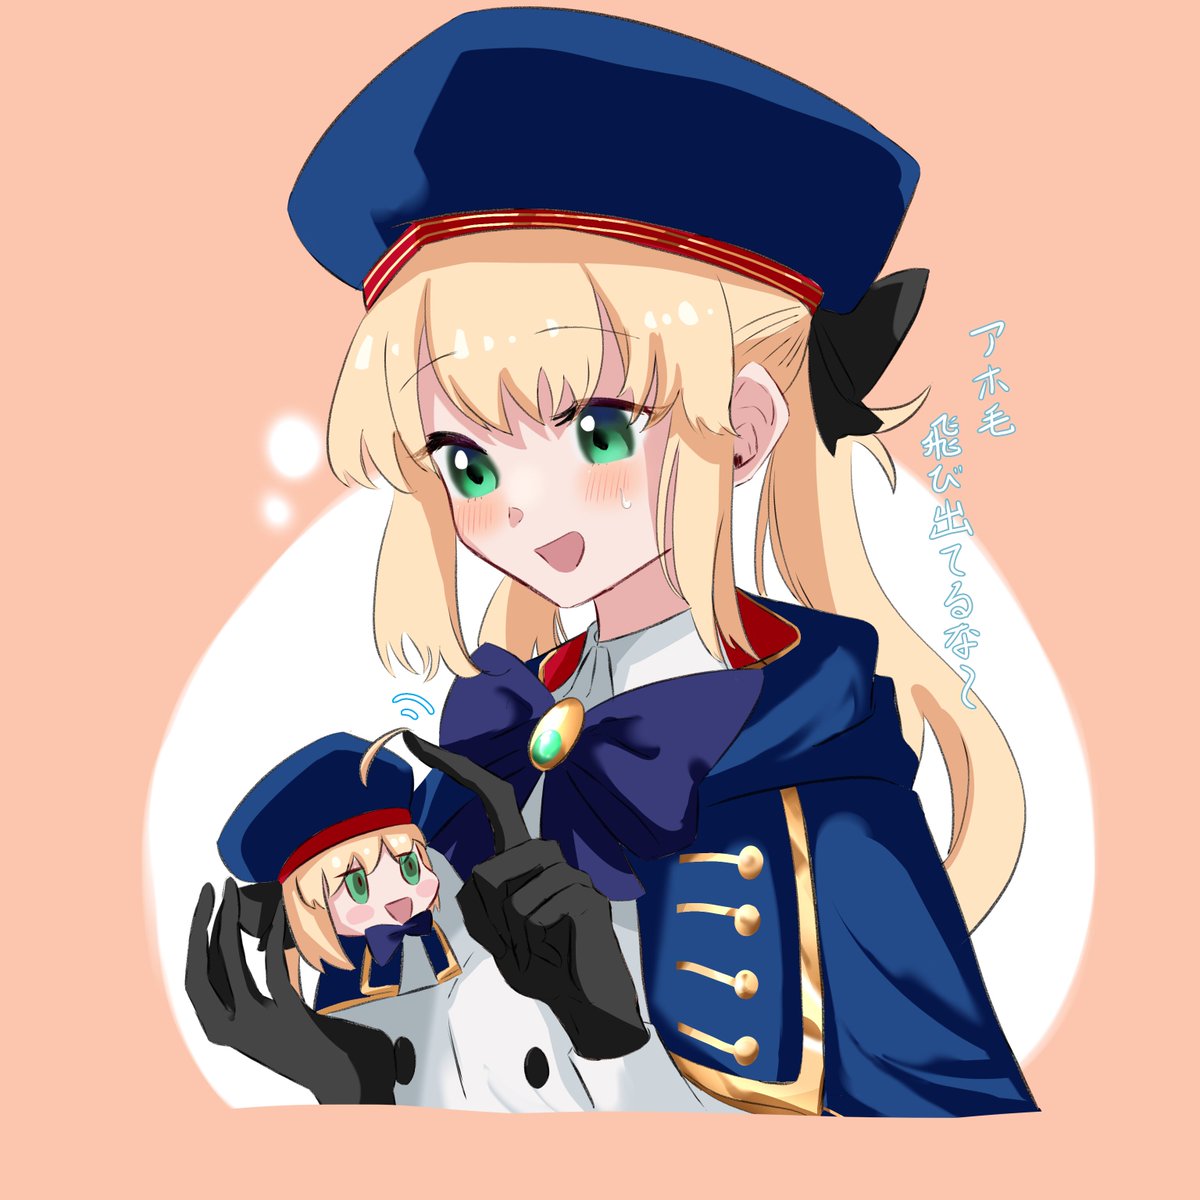 artoria caster (fate) ,artoria caster (second ascension) (fate) ,artoria pendragon (fate) blonde hair green eyes hat gloves blush long hair open mouth  illustration images